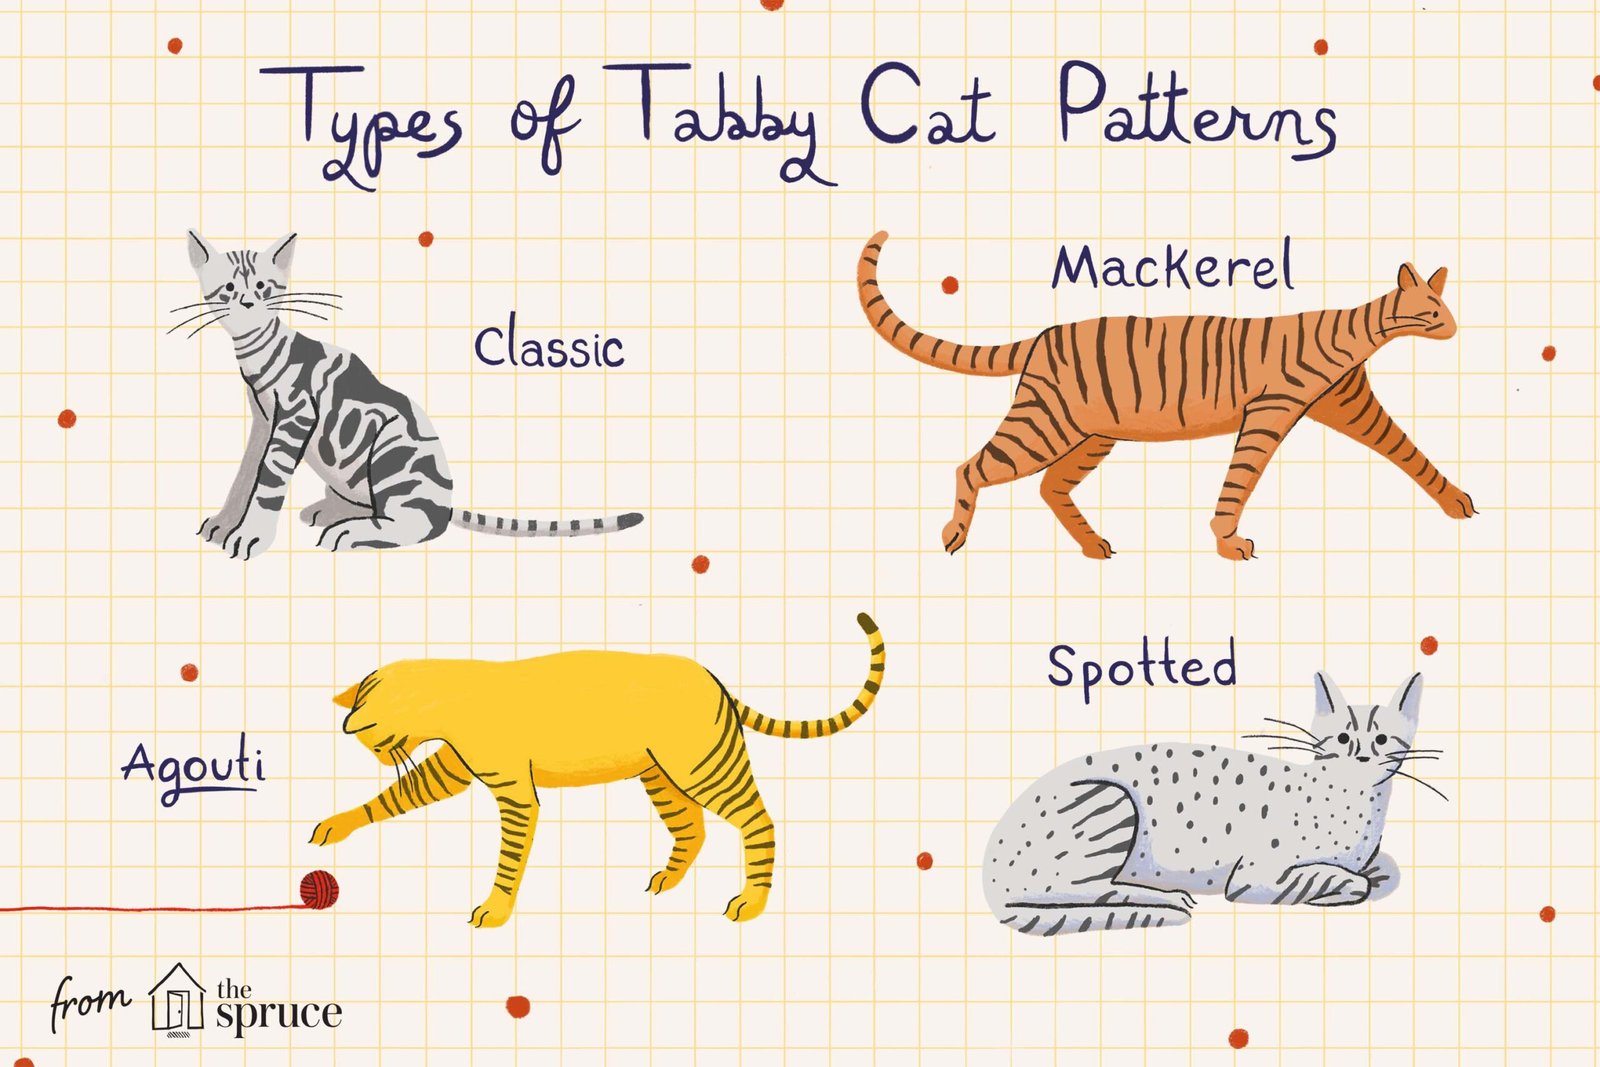 The Colors of Tabby Cats